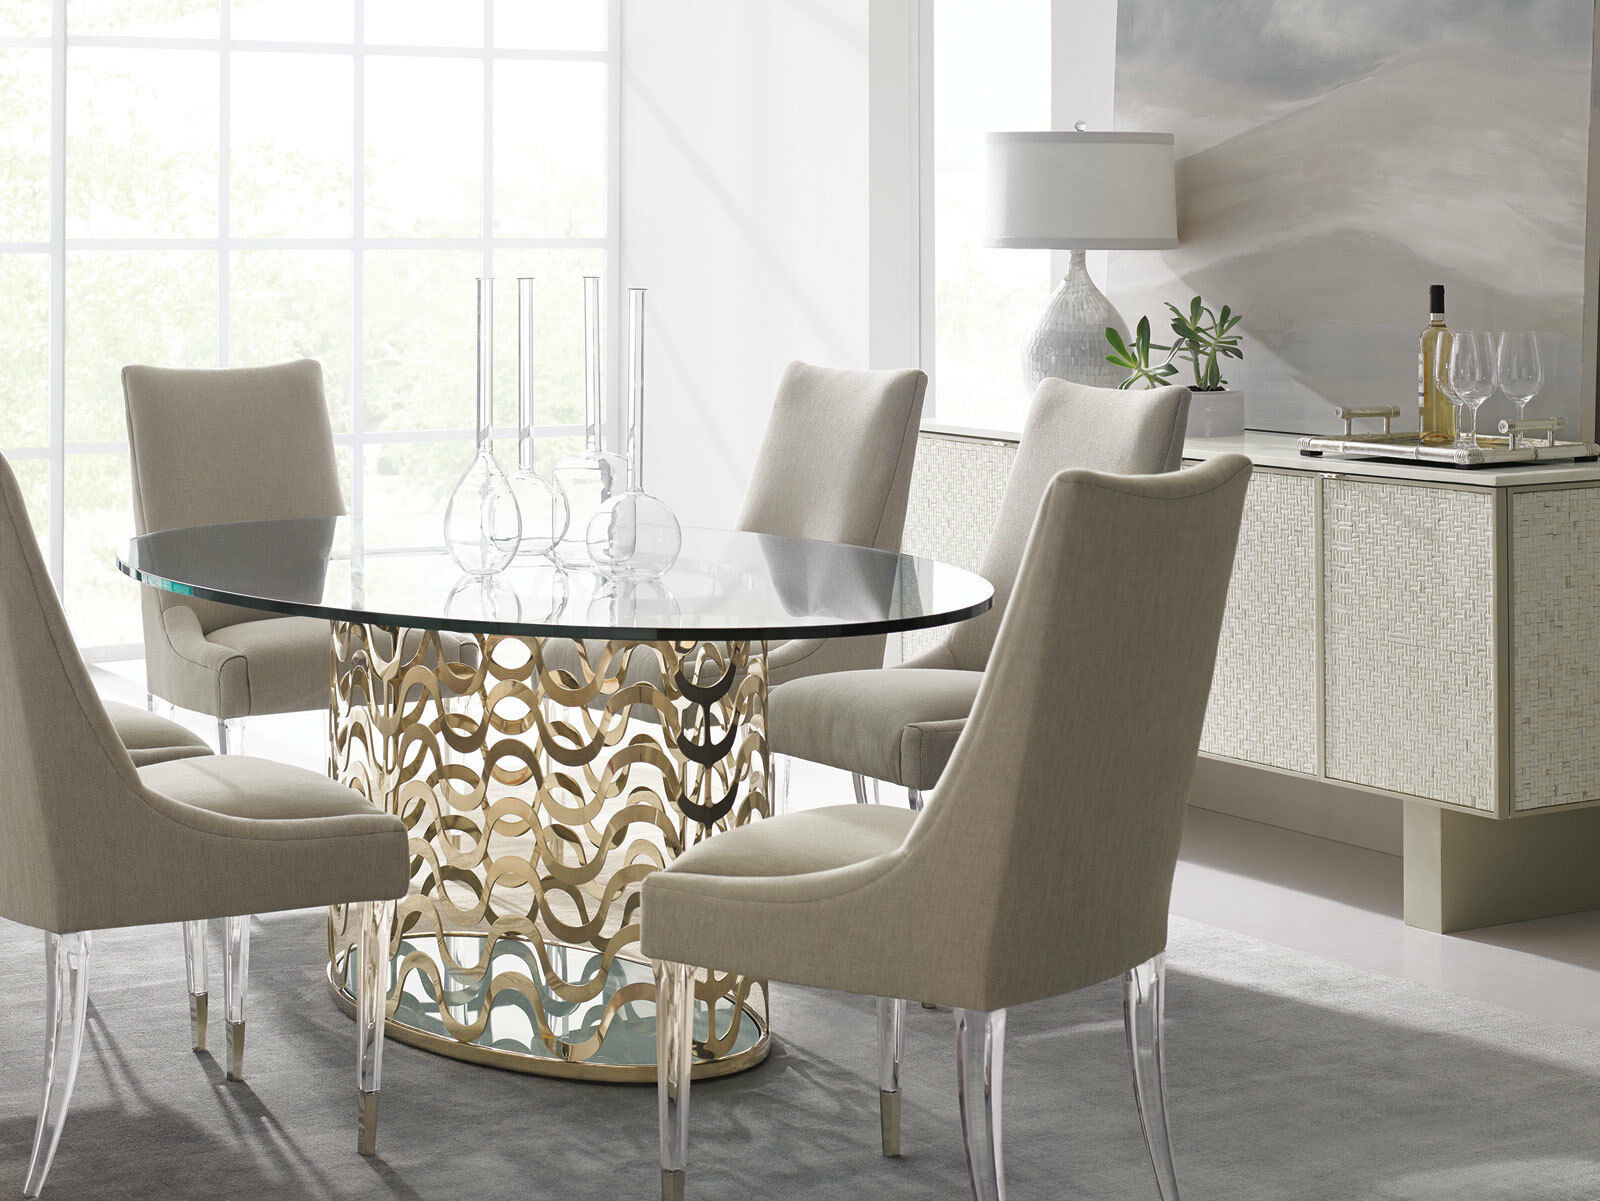 7 Piece Glass Dining Room Sets